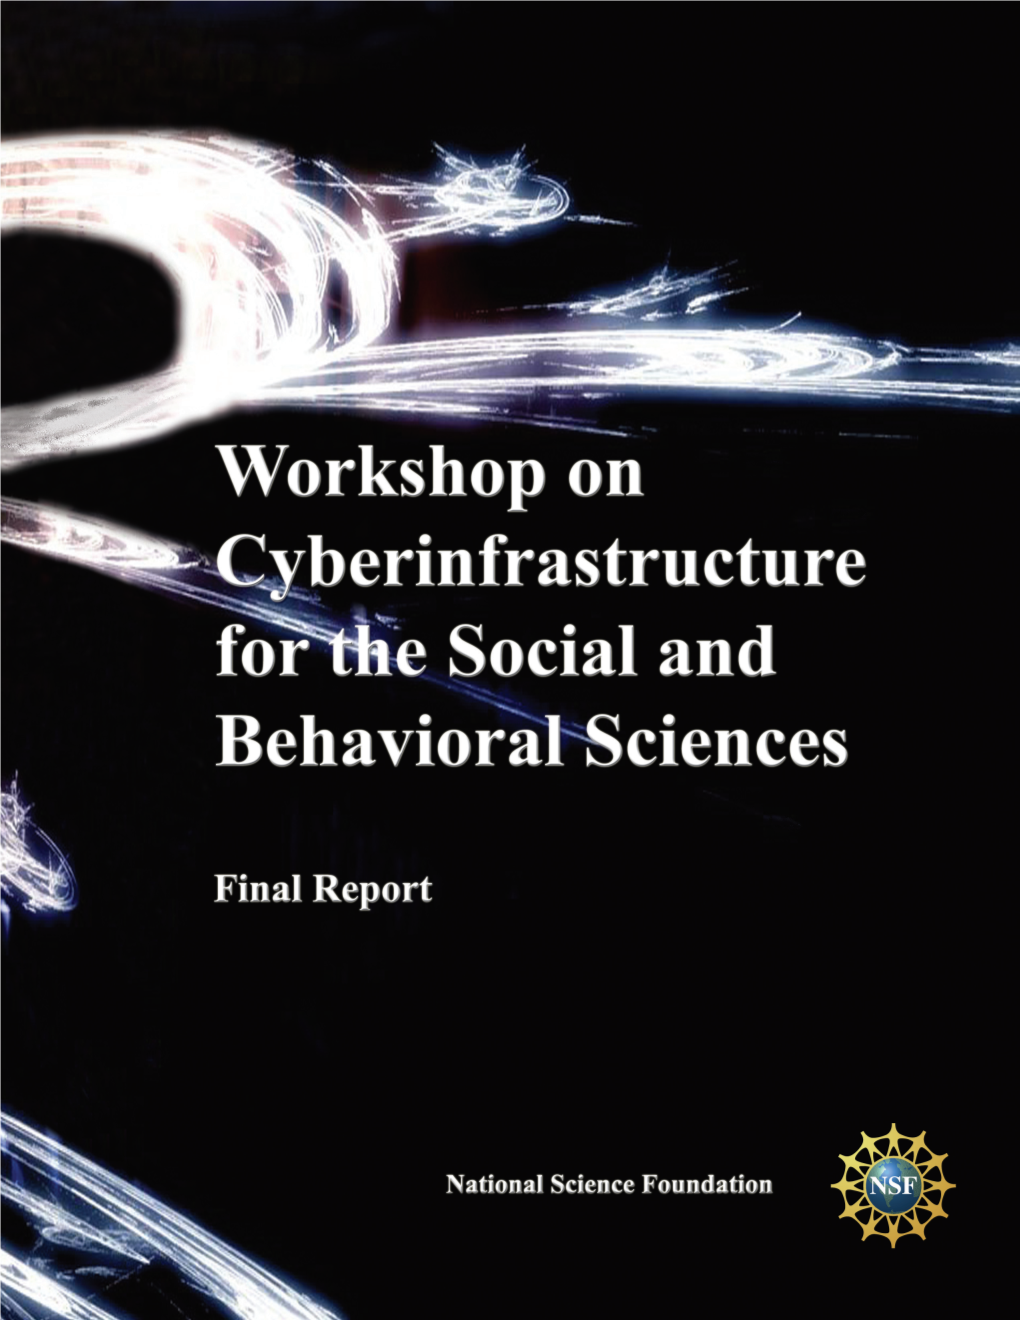 Workshop on Cyberinfrastructure for the Social and Behavioral Sciences: Final Report